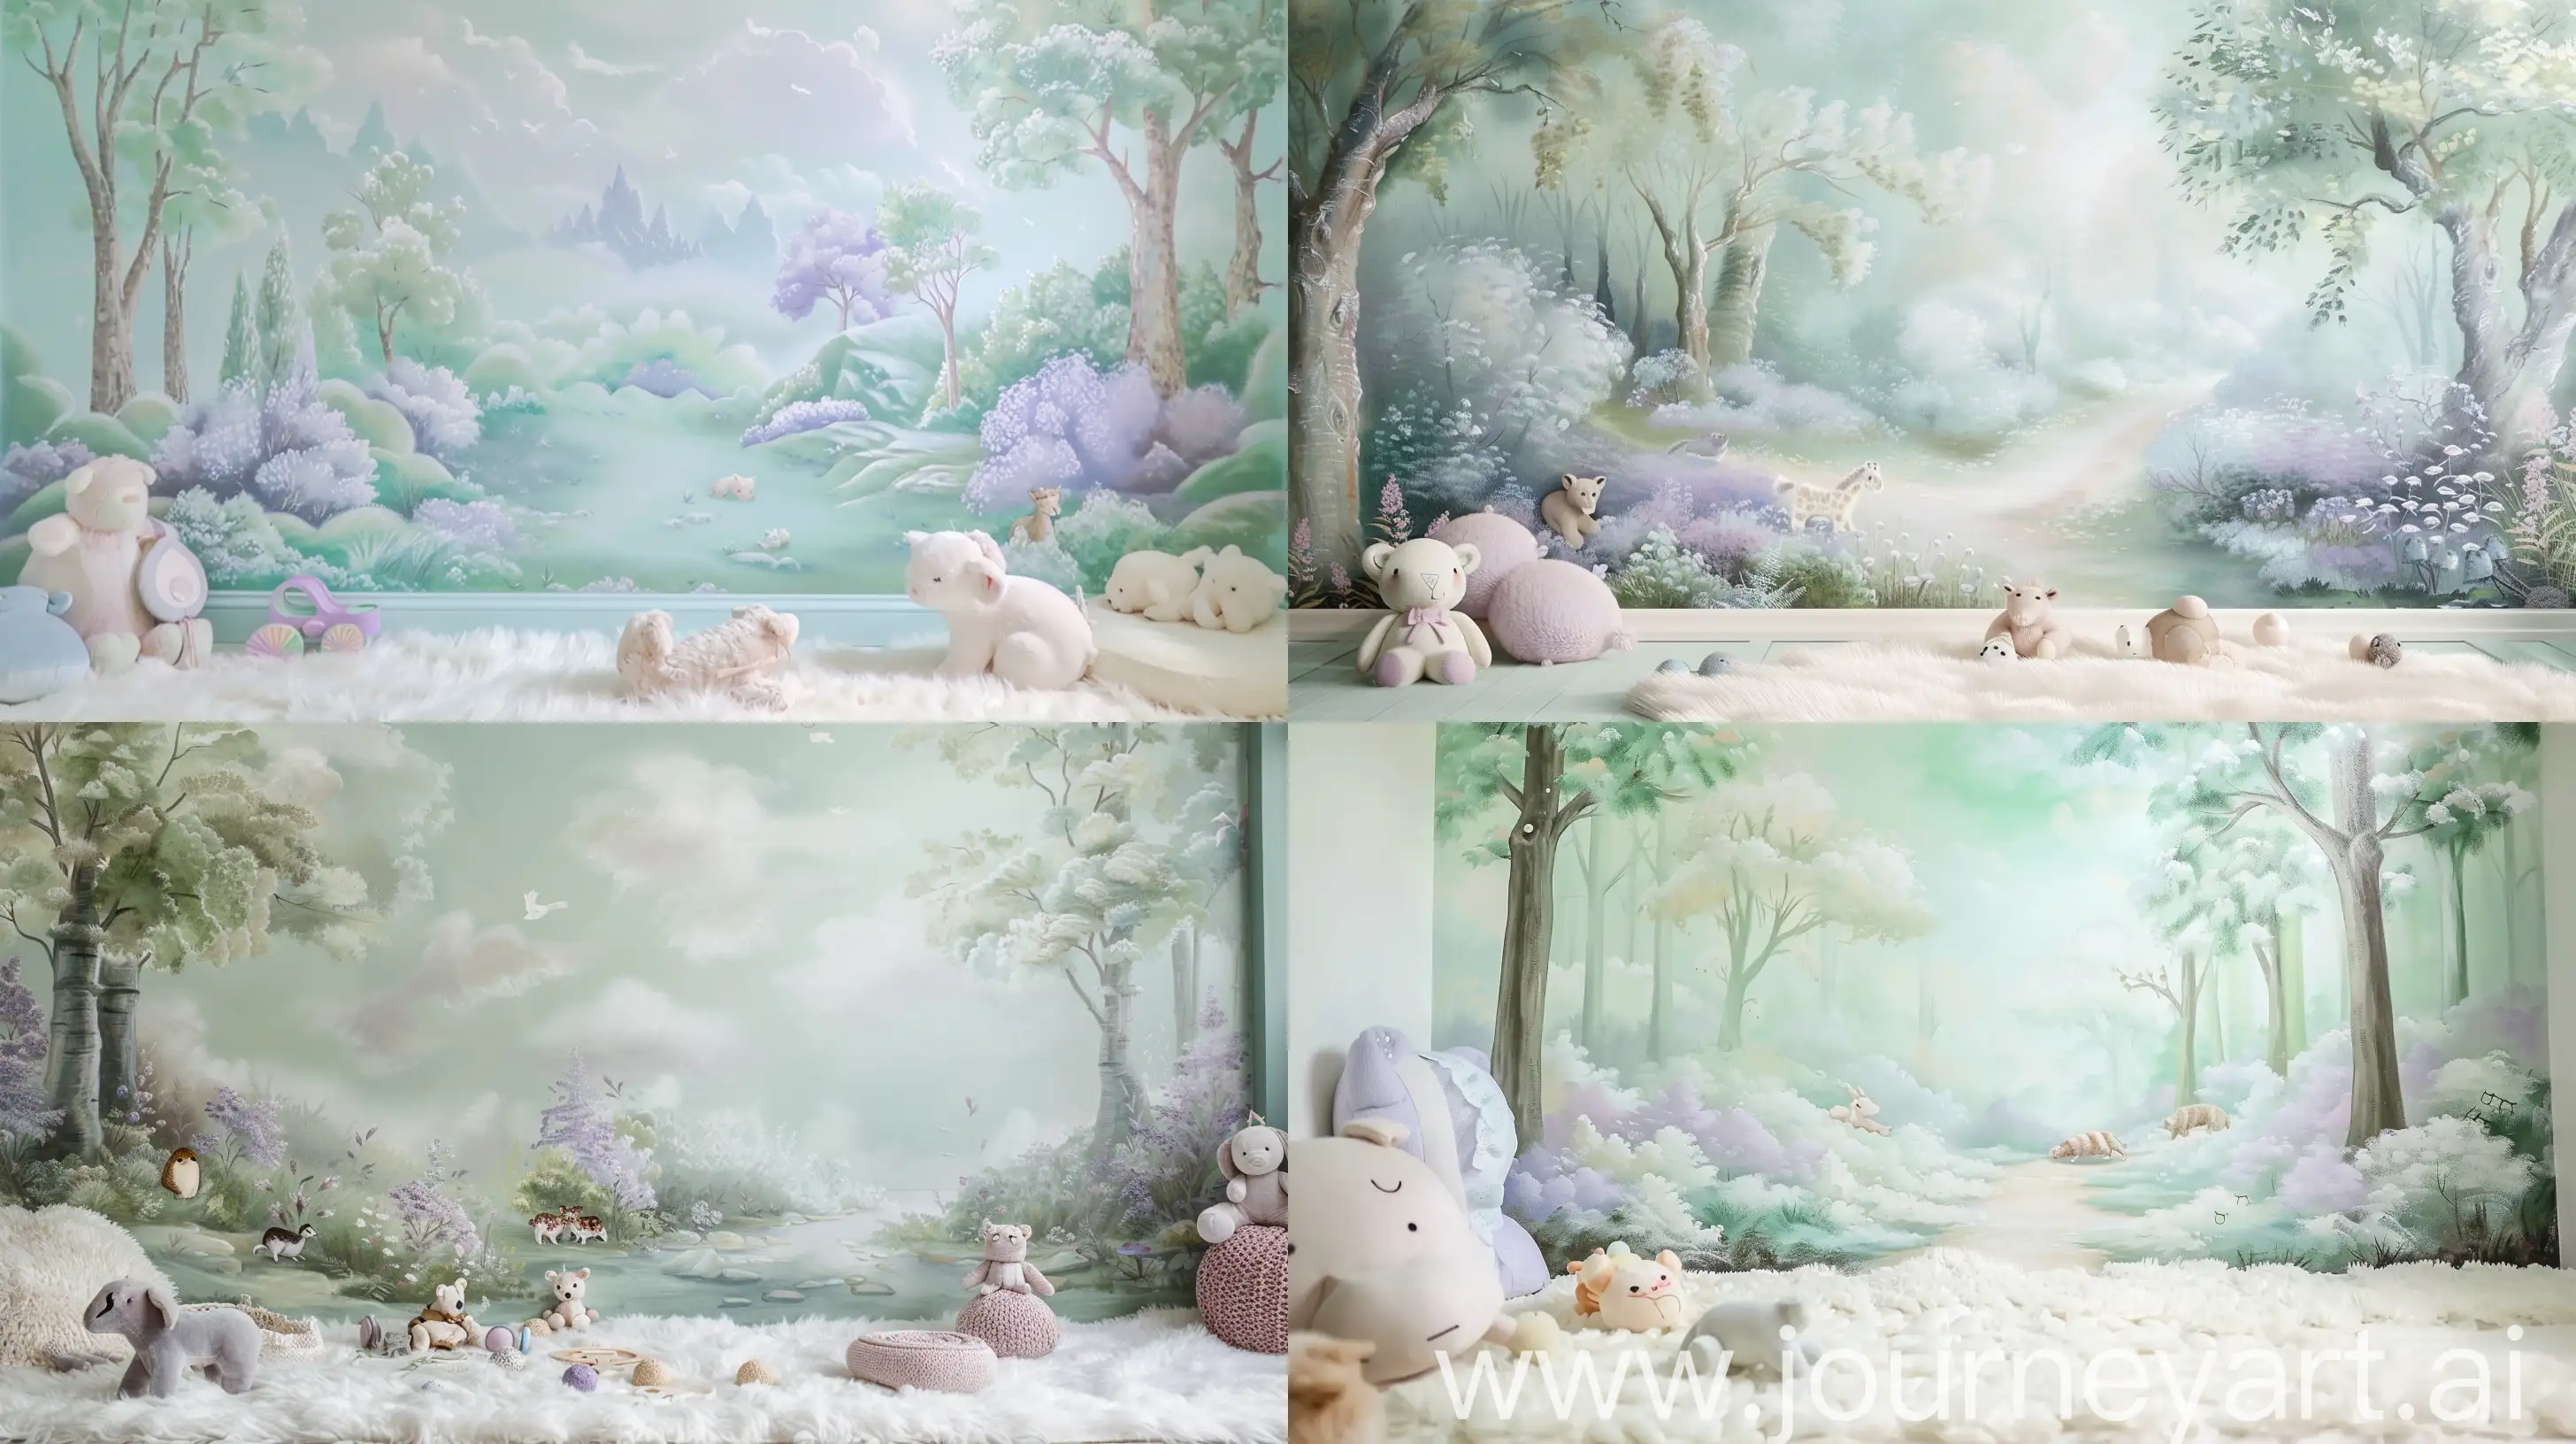 nursery room filled with soft pastel hues of mint green and lavender. Imagine a hand-painted mural of a magical forest scene on the wall, with plush animal toys scattered across a fluffy white rug. --ar 16:9